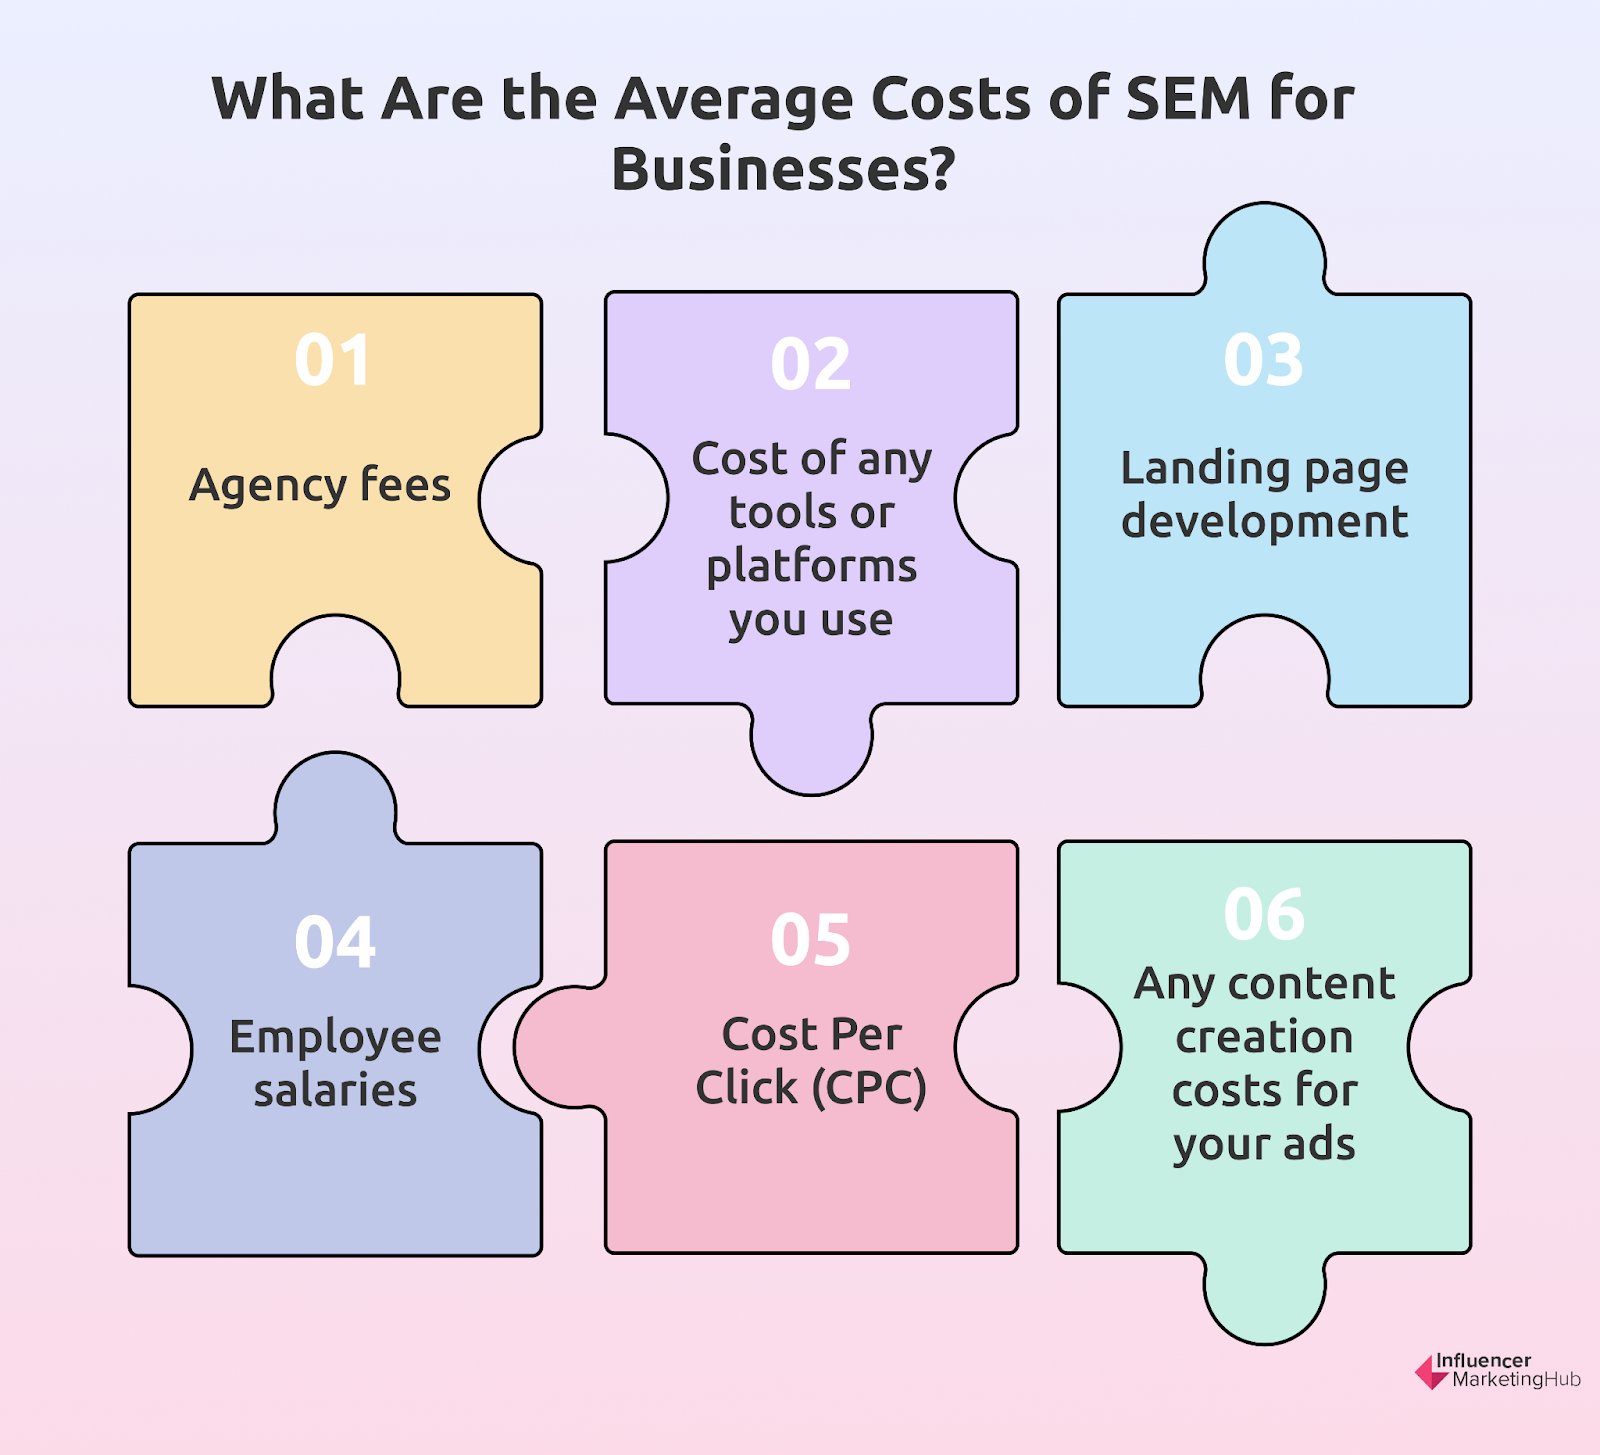 What Are Typical SEM Costs Businesses Face